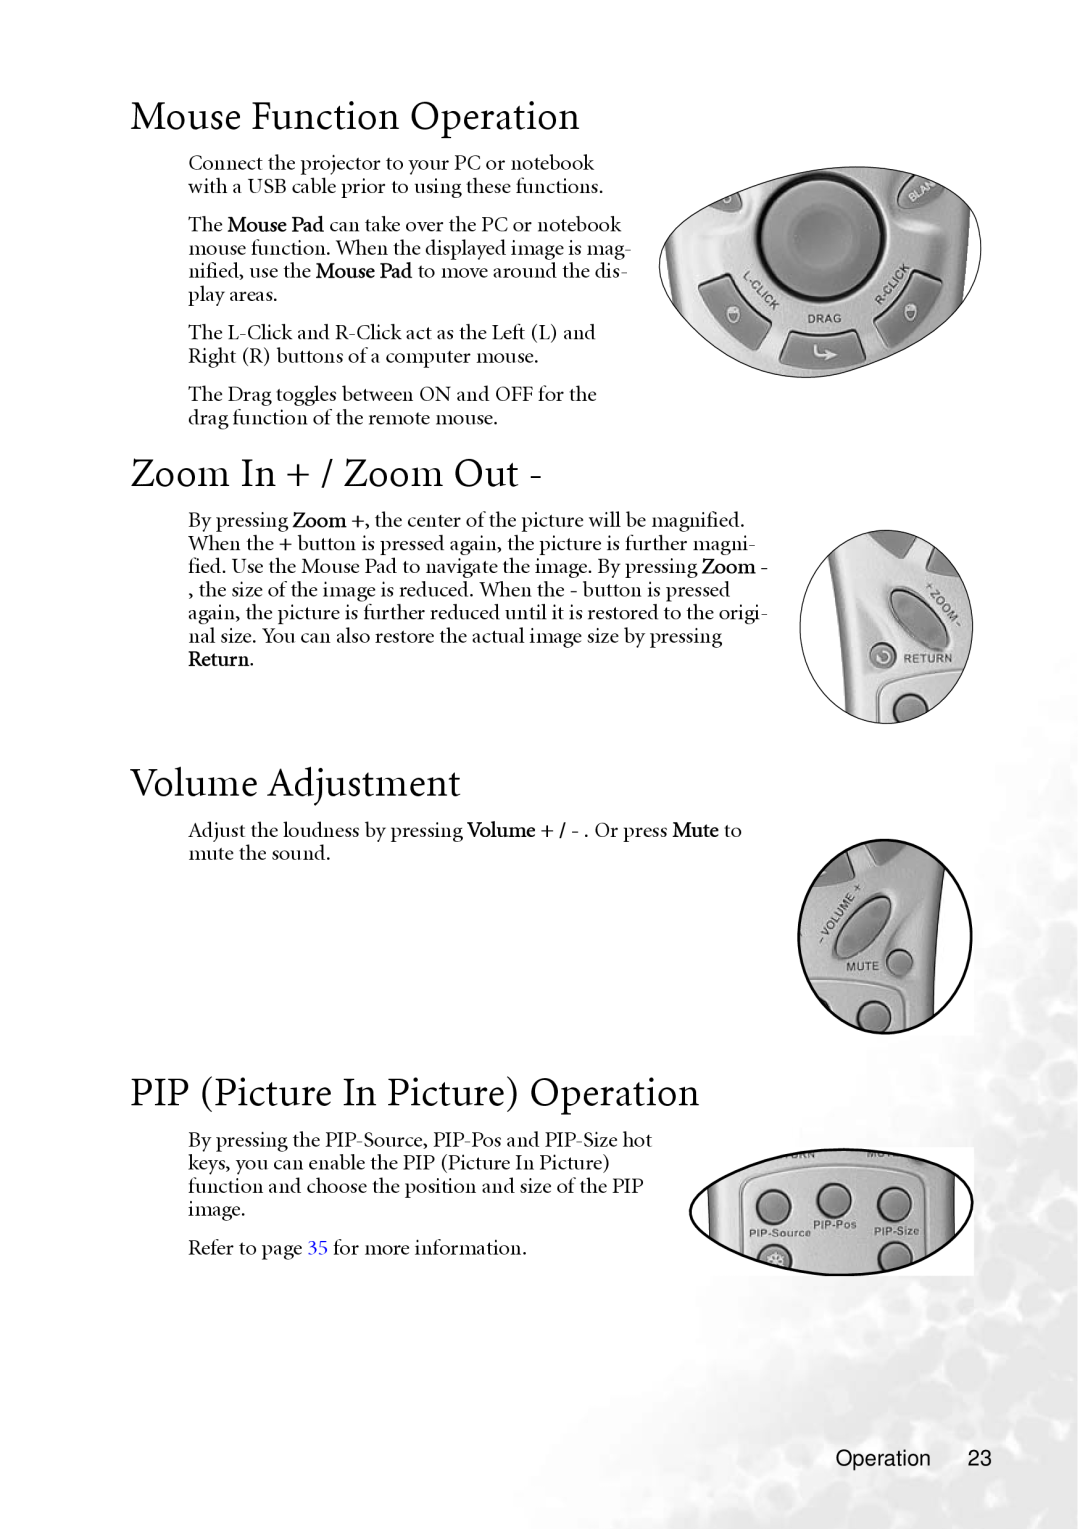 BenQ PB8250, PB8240 Mouse Function Operation, Zoom In + / Zoom Out, Volume Adjustment, PIP Picture In Picture Operation 